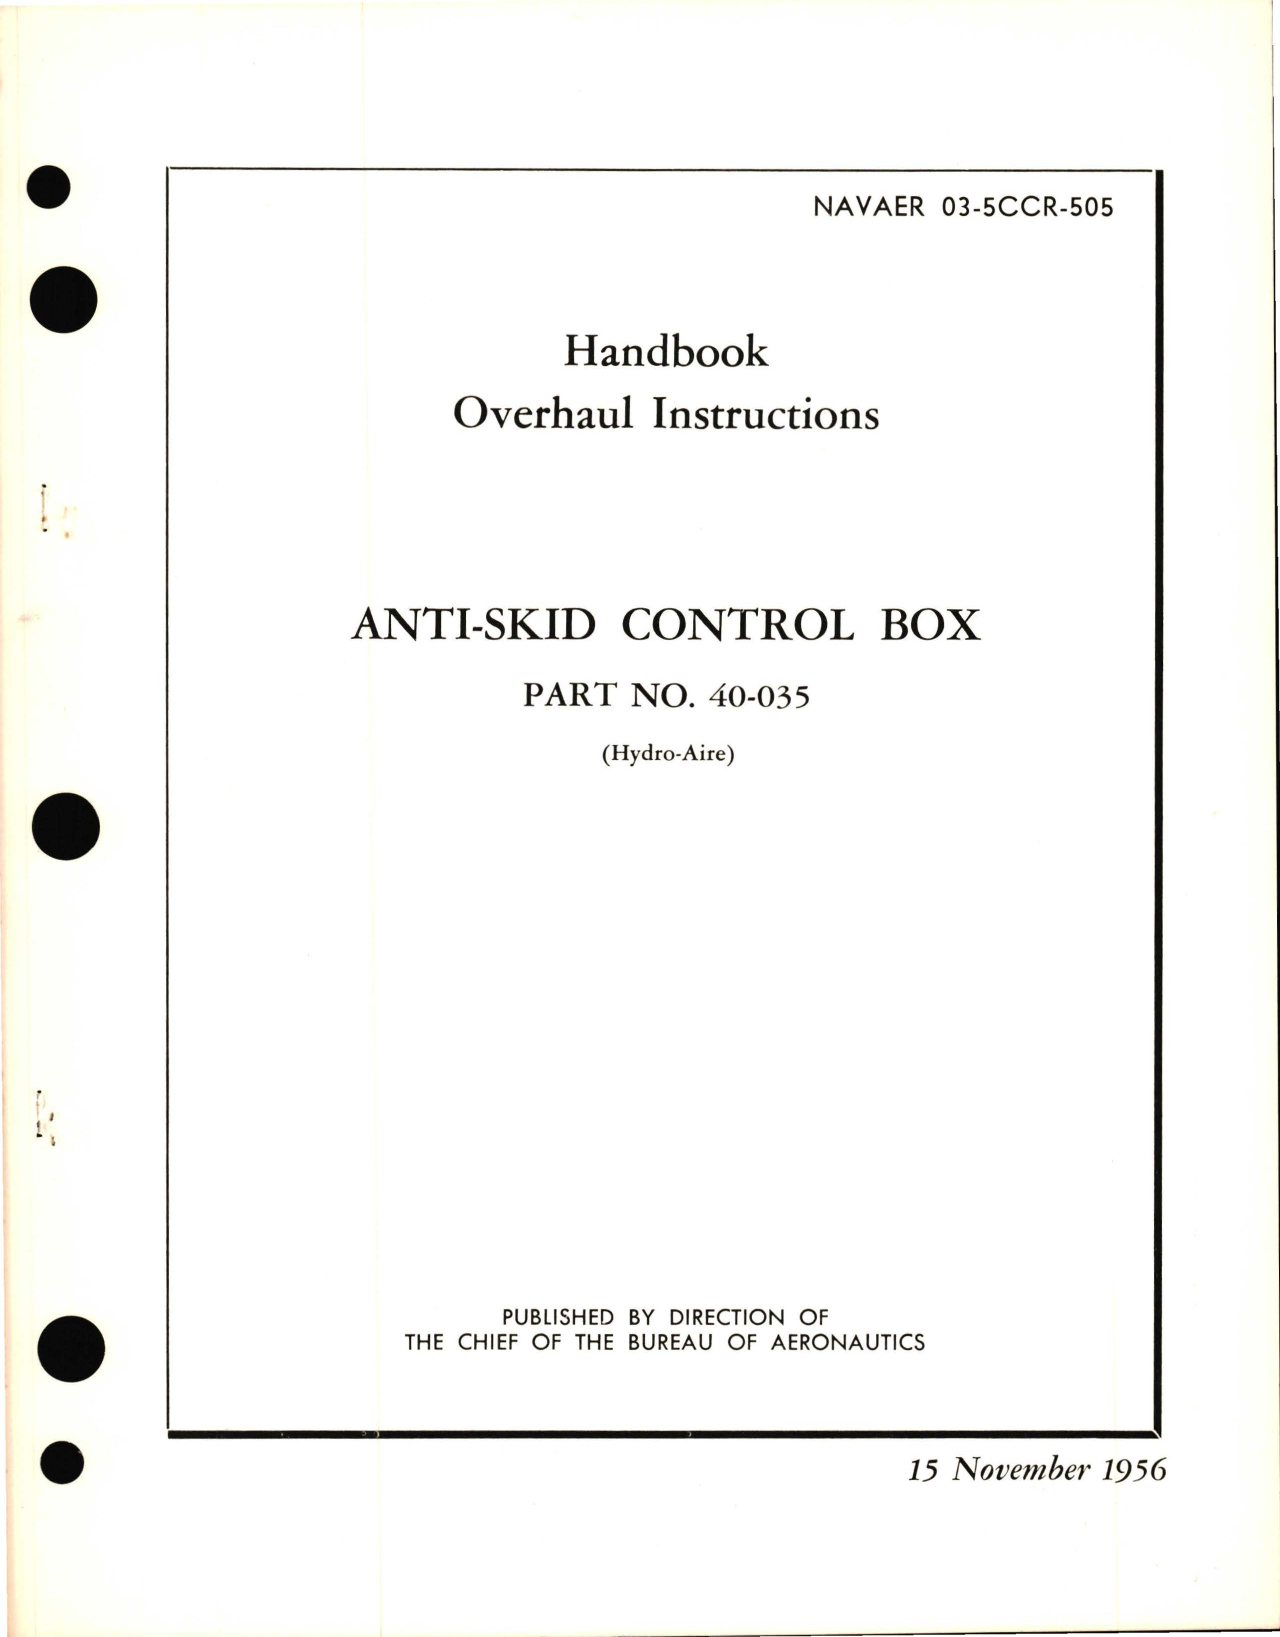 Sample page 1 from AirCorps Library document: Overhaul Instructions for Anti-Skid Control Box - Part 40-035